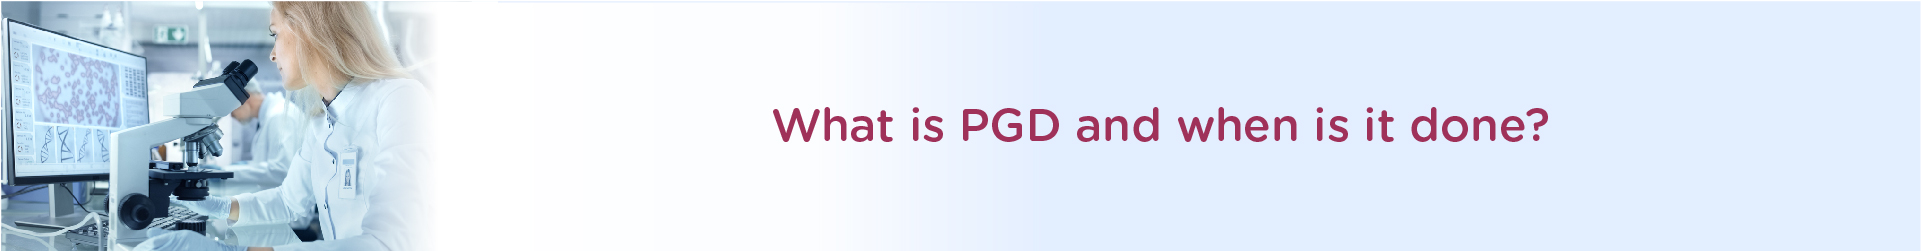 What is PGD and when is it done?